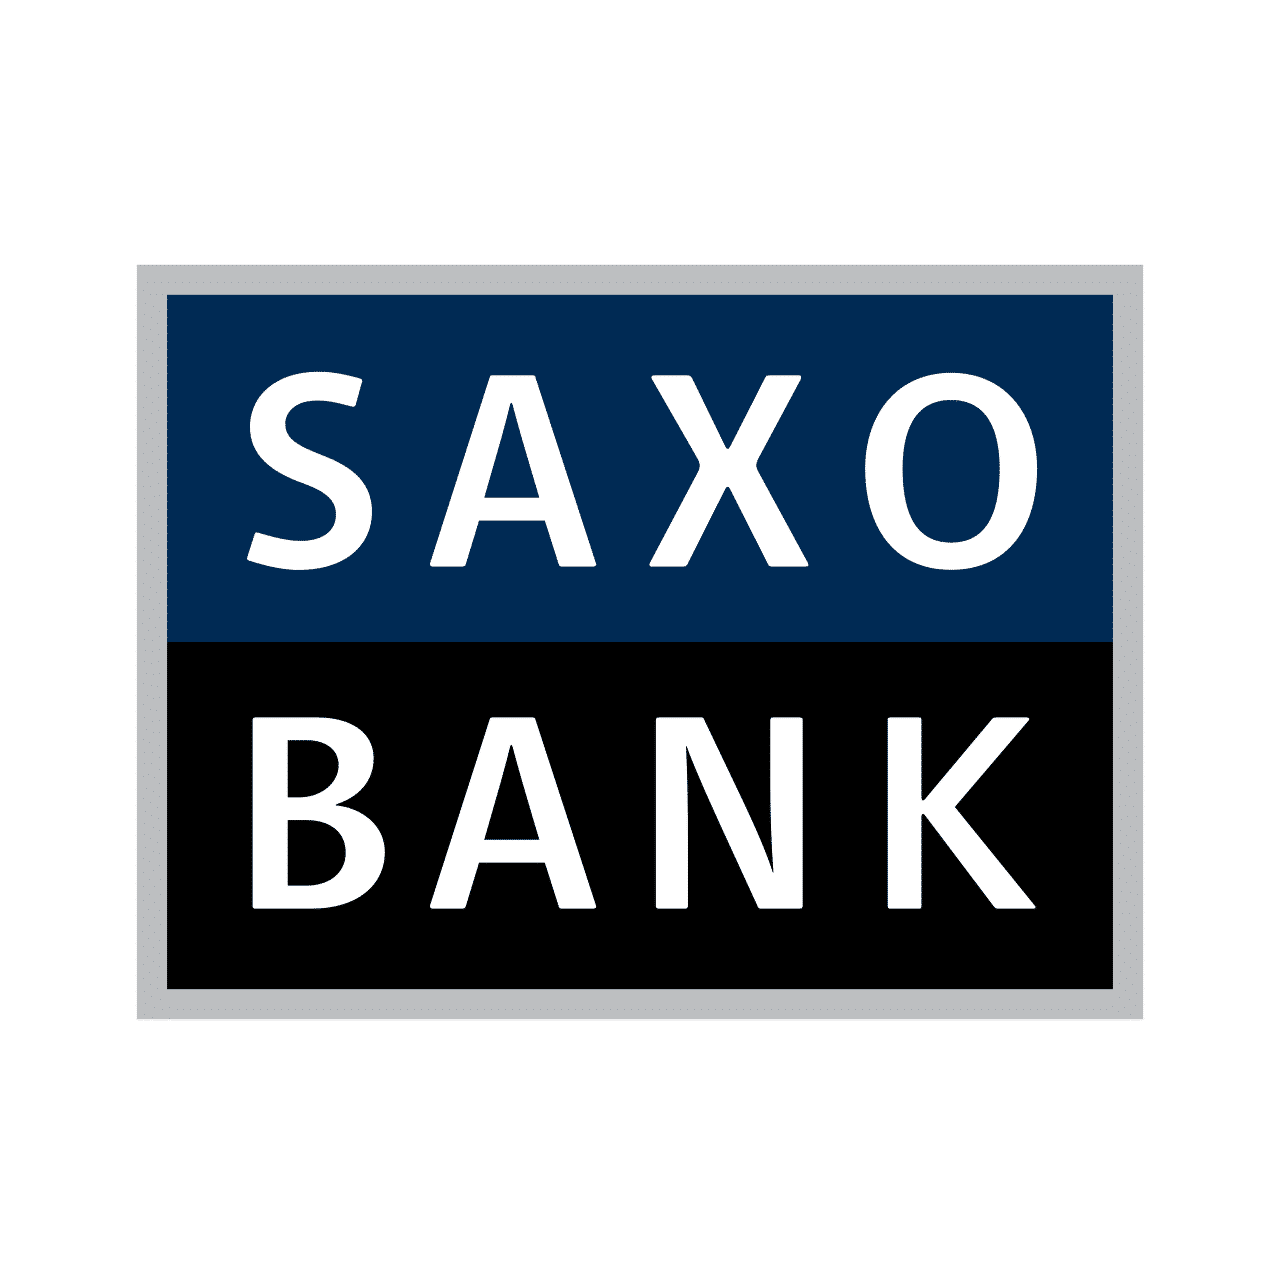 Saxo Bank's Risk Holds, as Low Leverage on CHF Pairs Enforced Since September